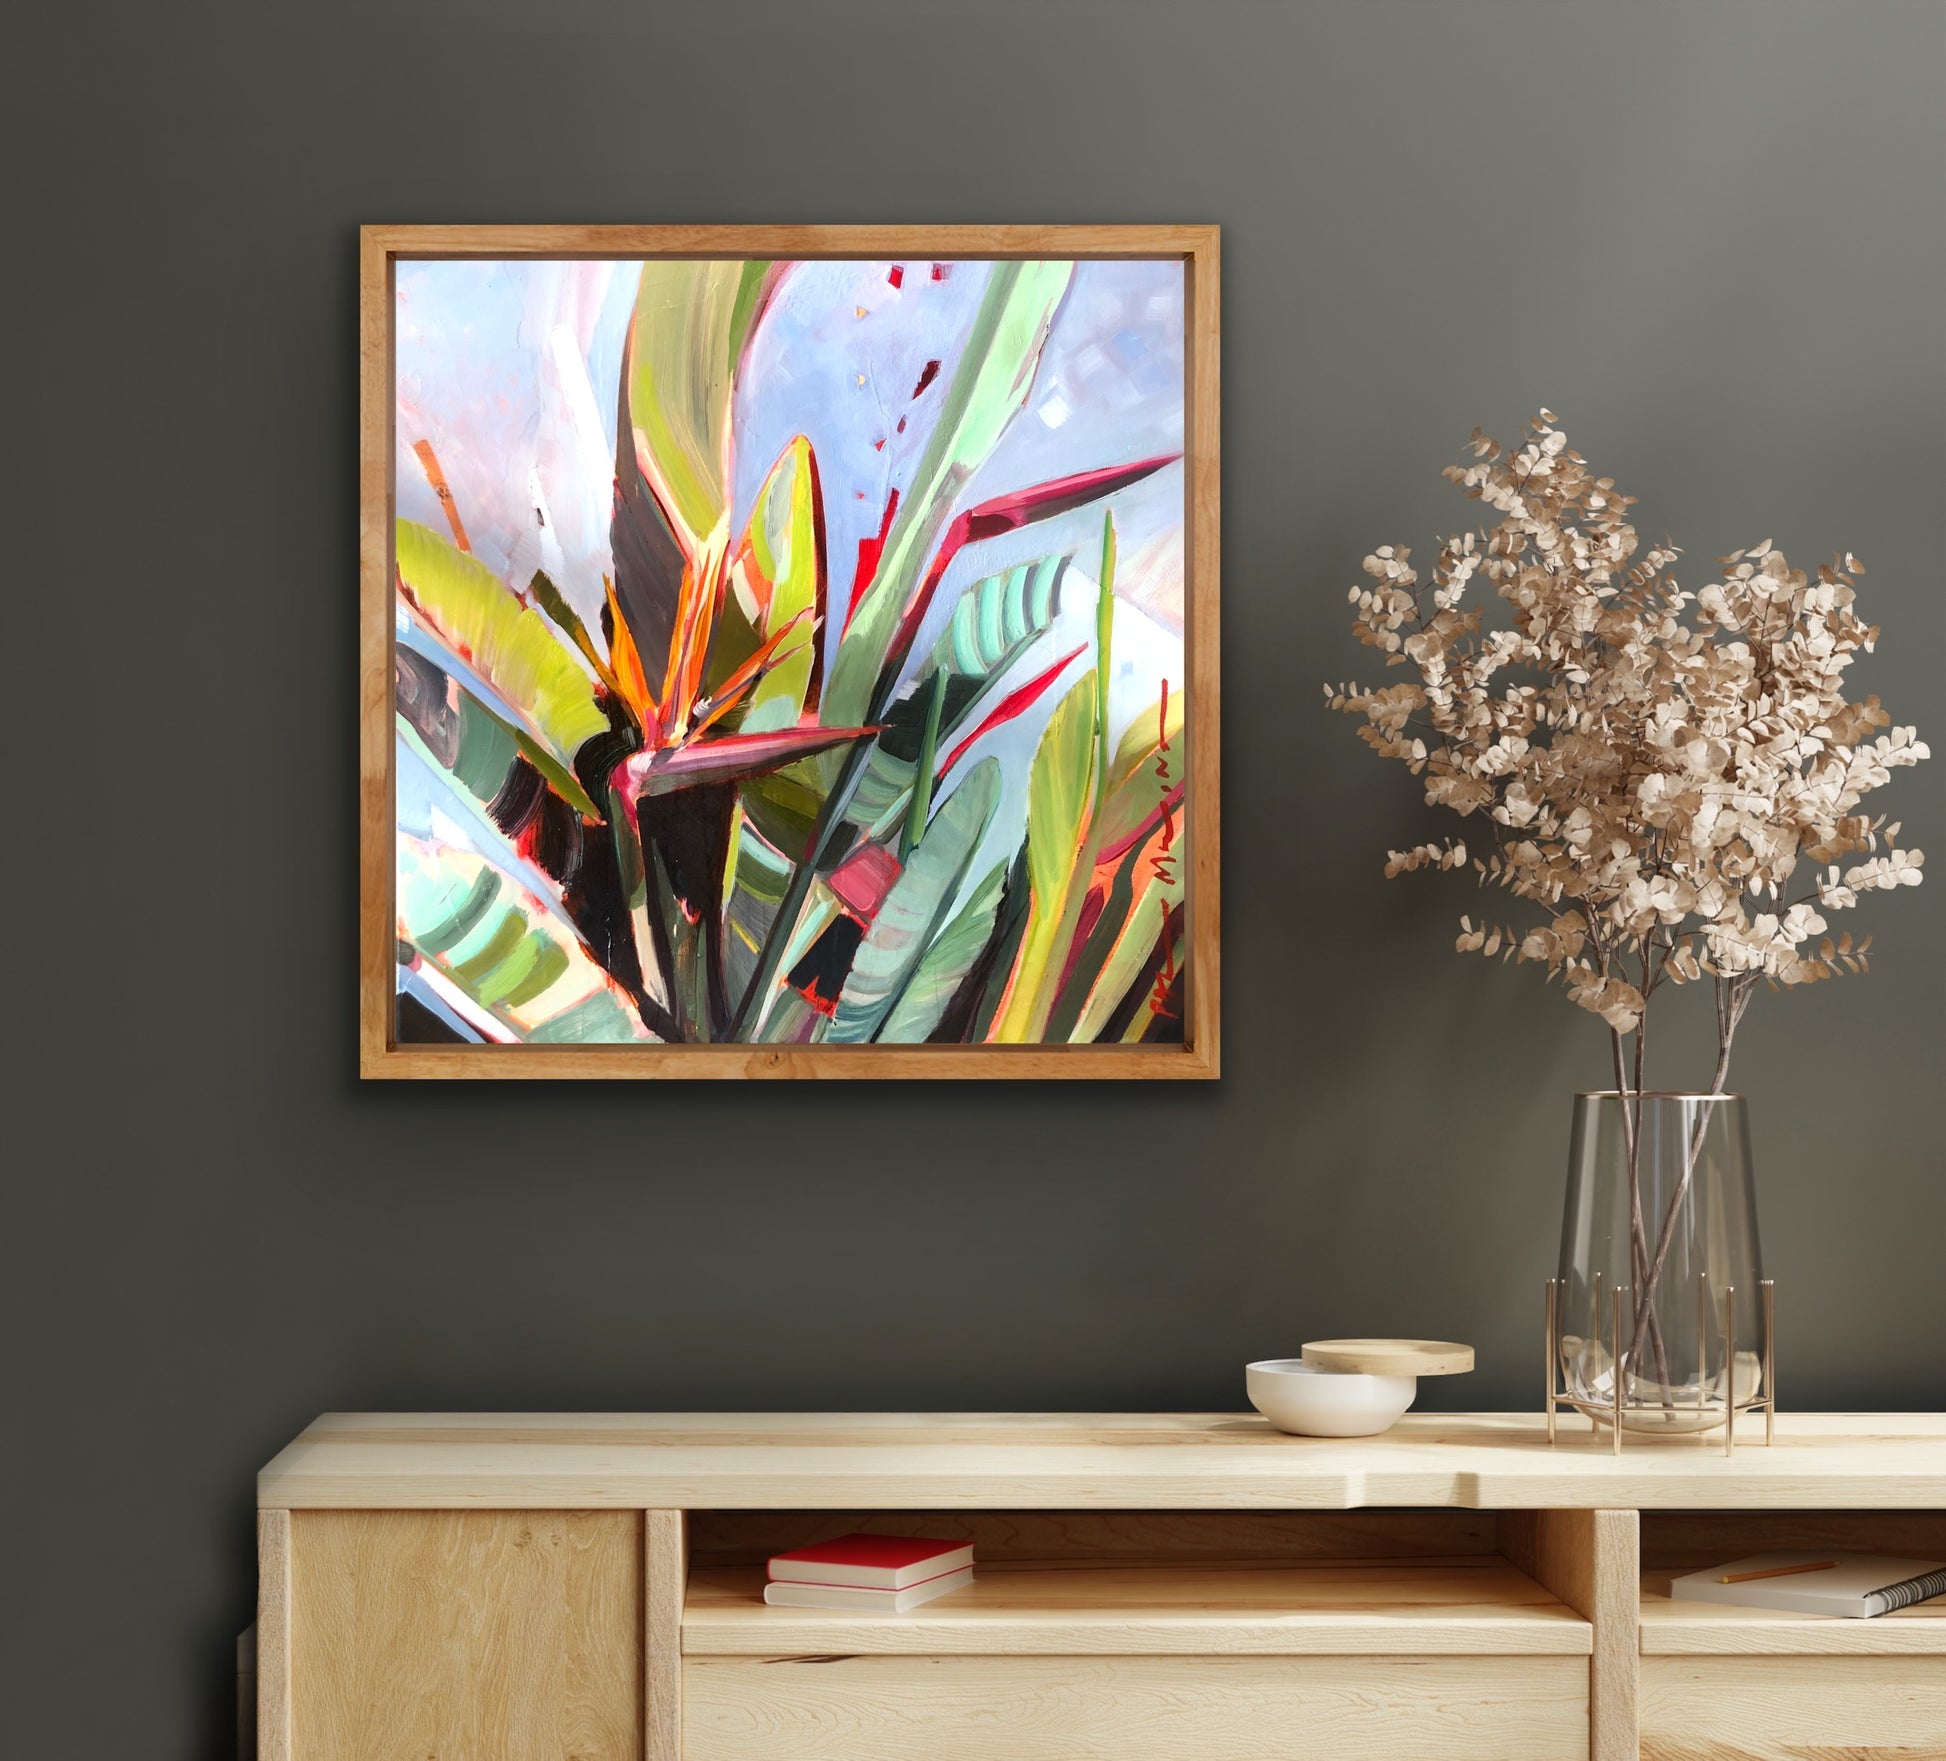 Bright Bird of paradise painting against a grey background wall.